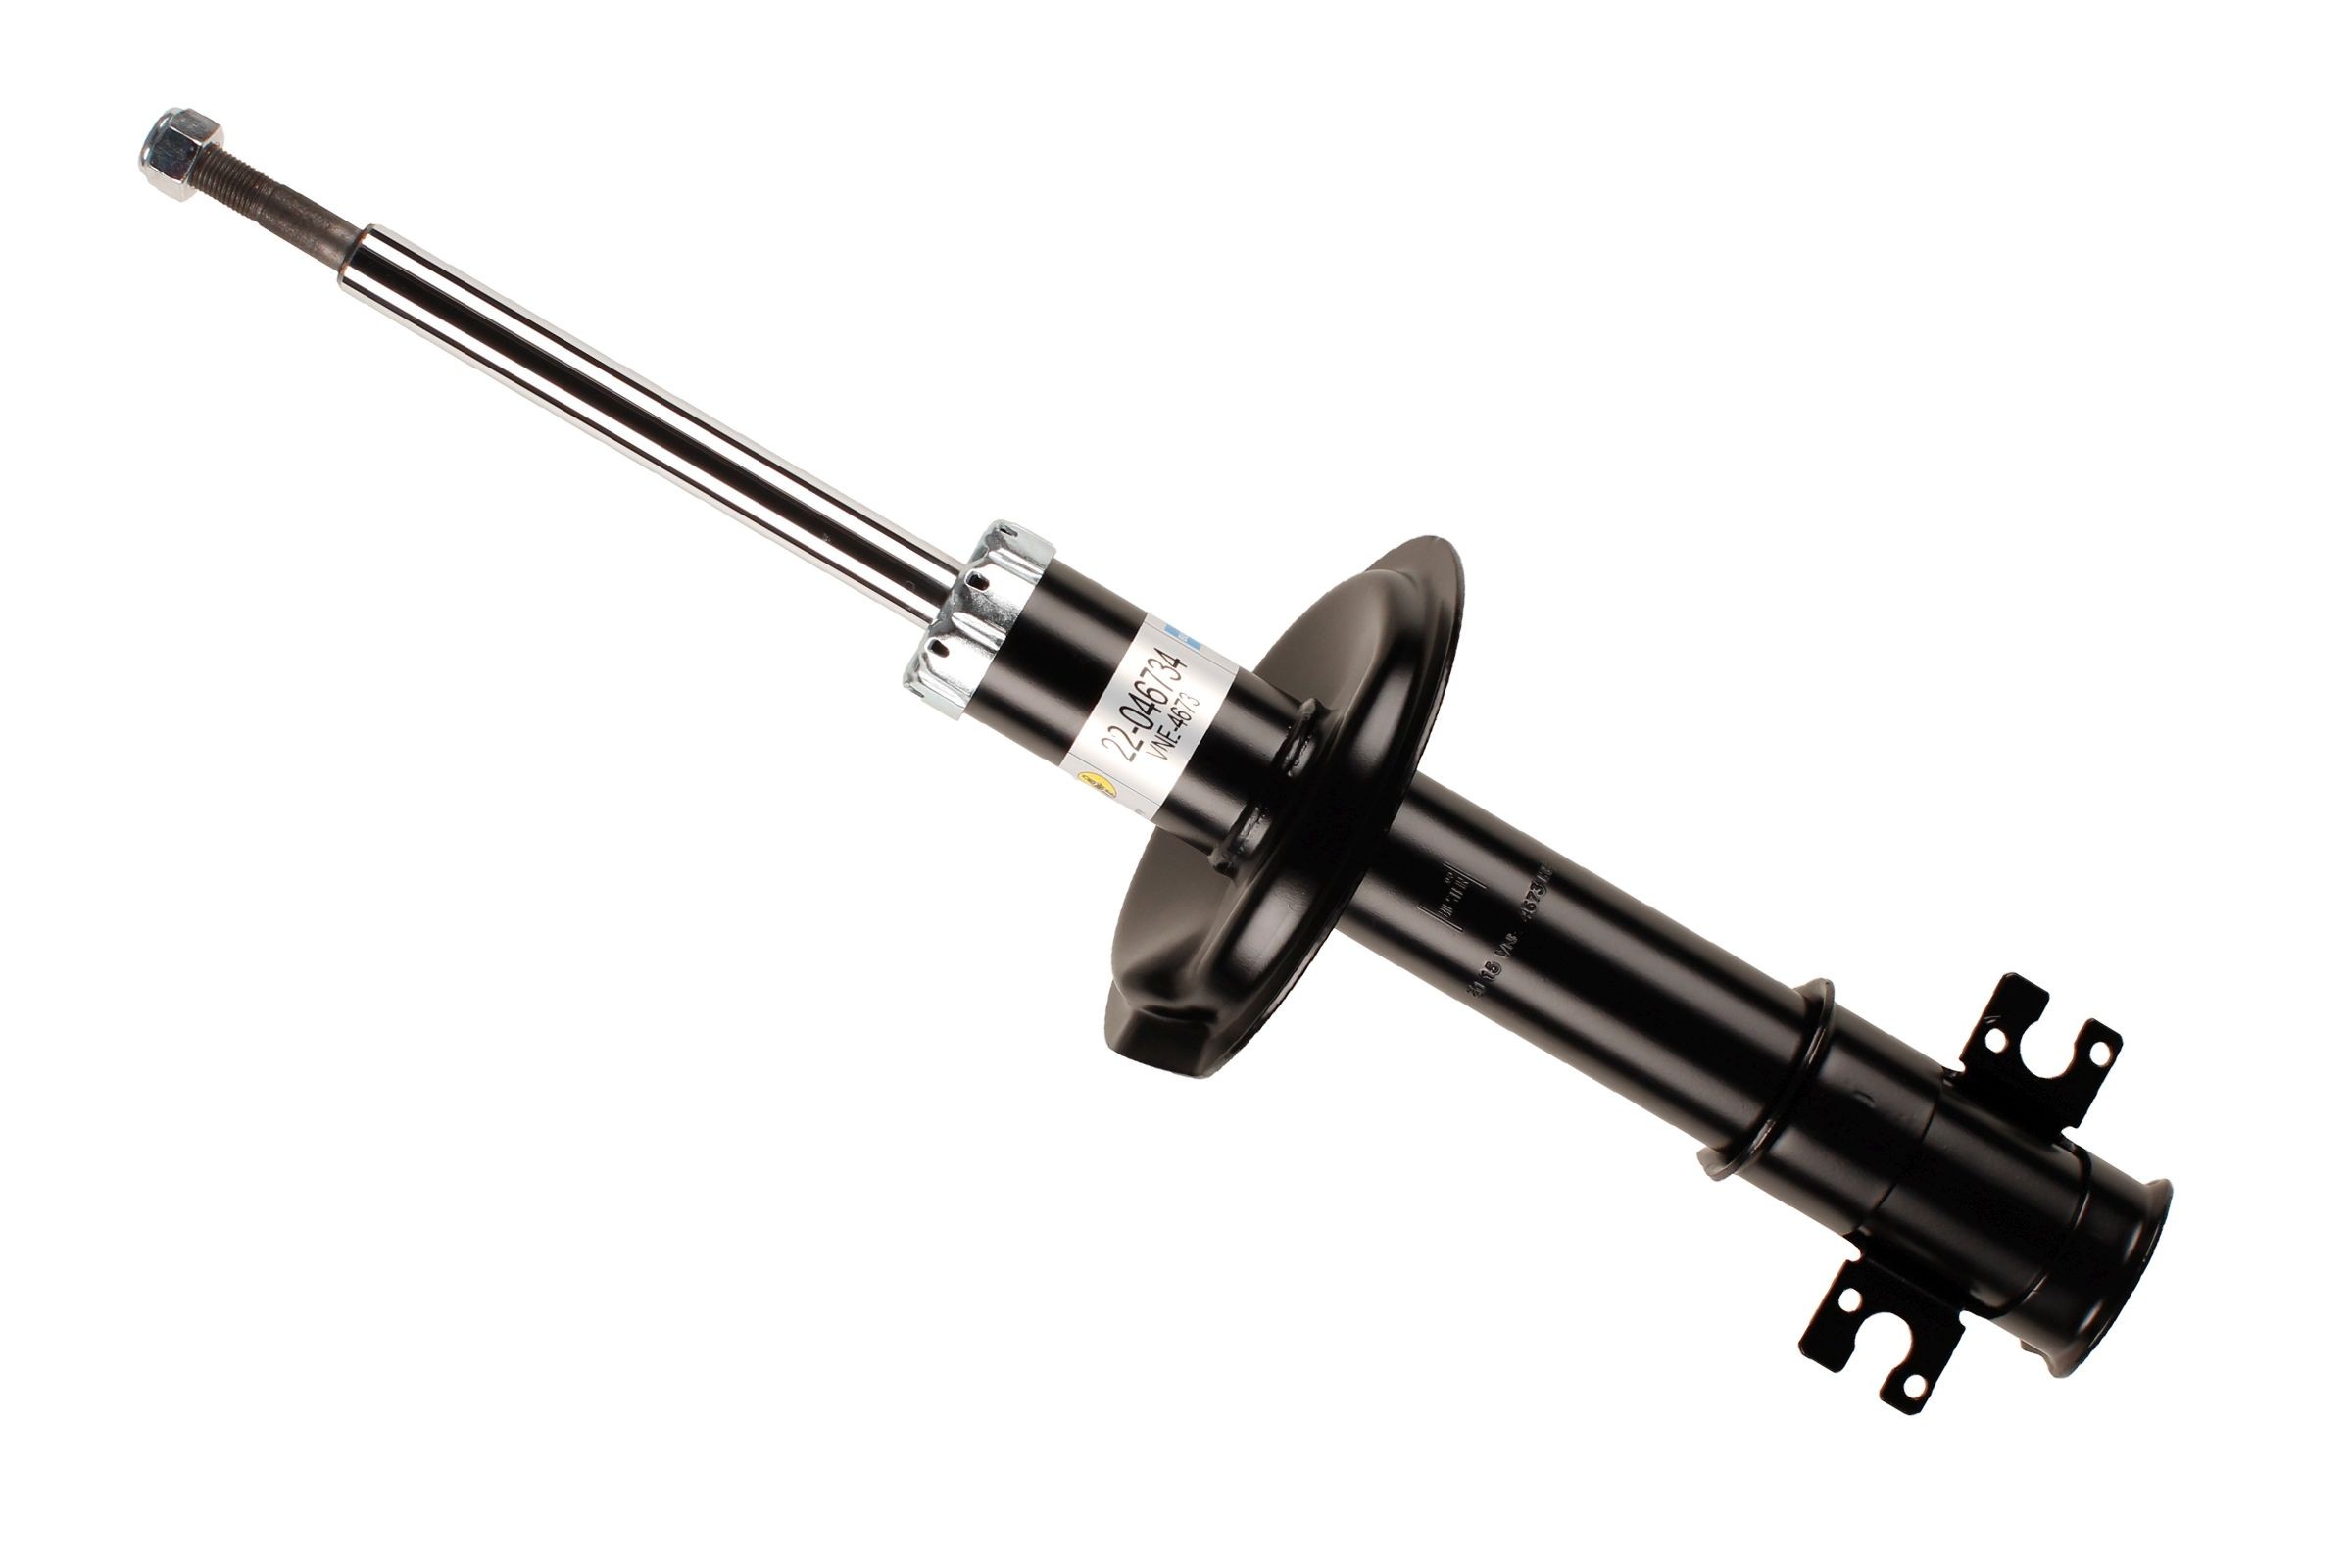 VNE-4673 BILSTEIN - B4 OE Replacement Front Axle, Gas Pressure, Twin-Tube, Suspension Strut, Top pin, Bottom Clamp Shocks 22-046734 buy